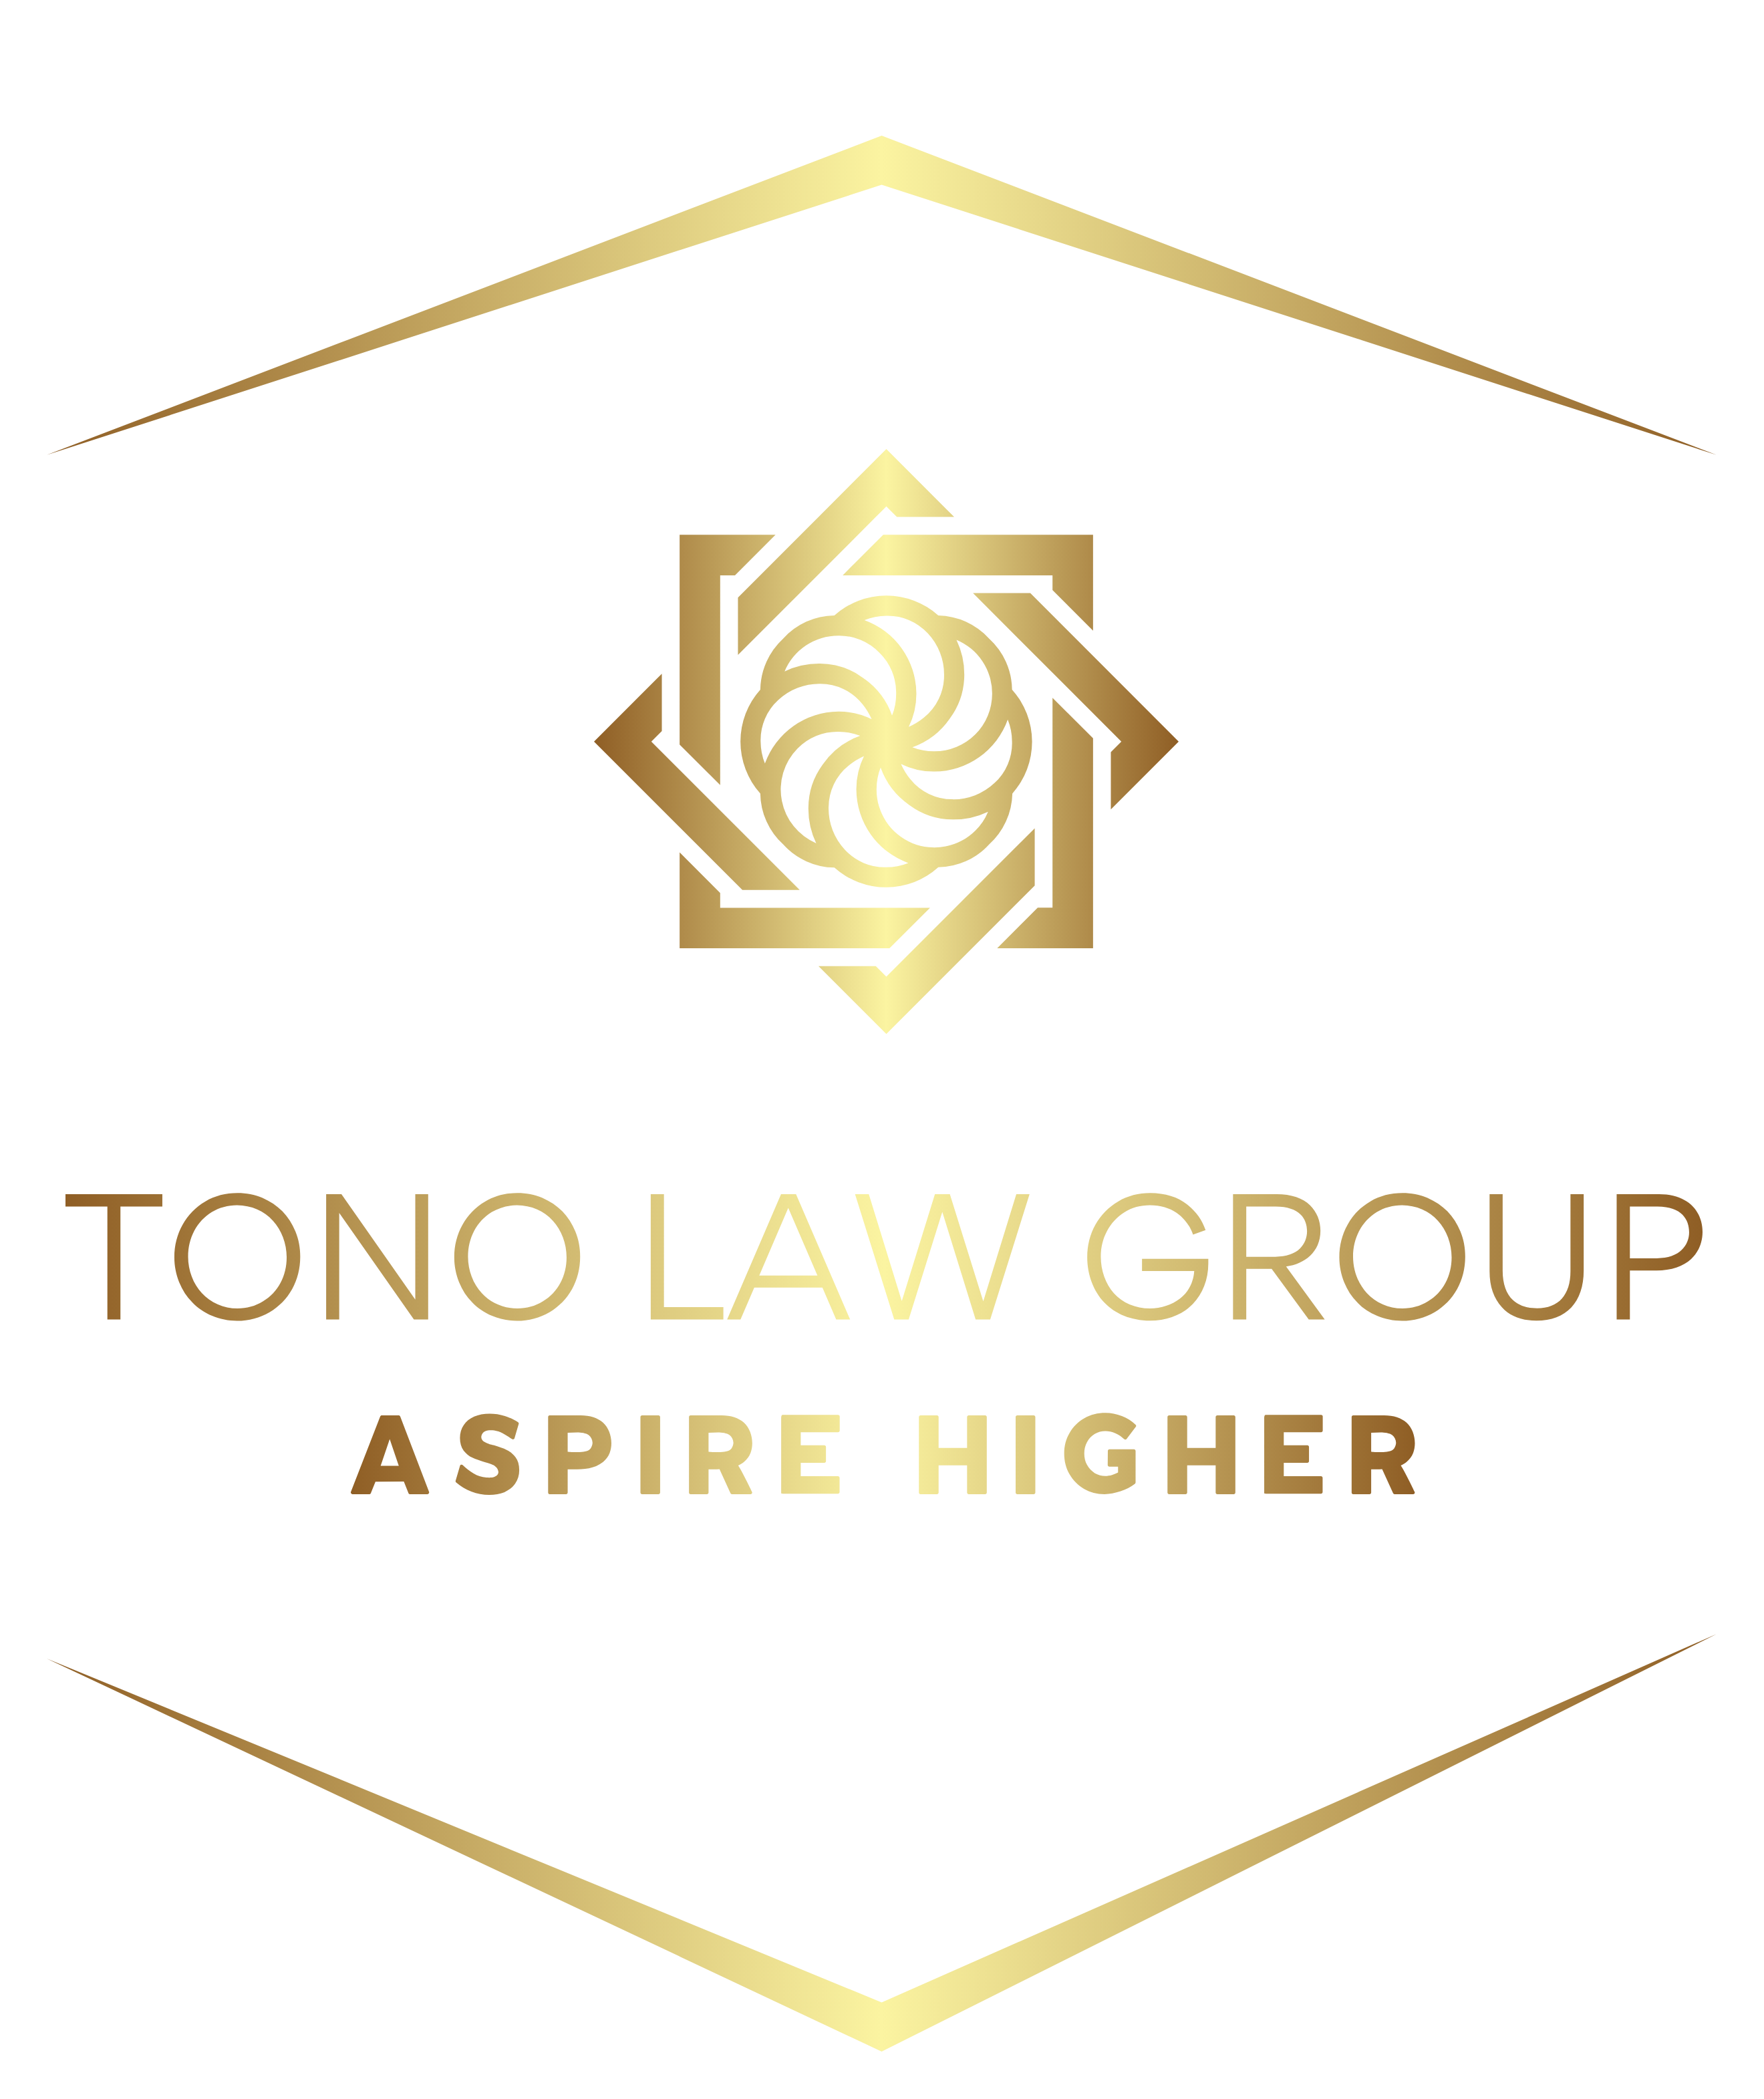 Tono Law Group - Aspire Higher